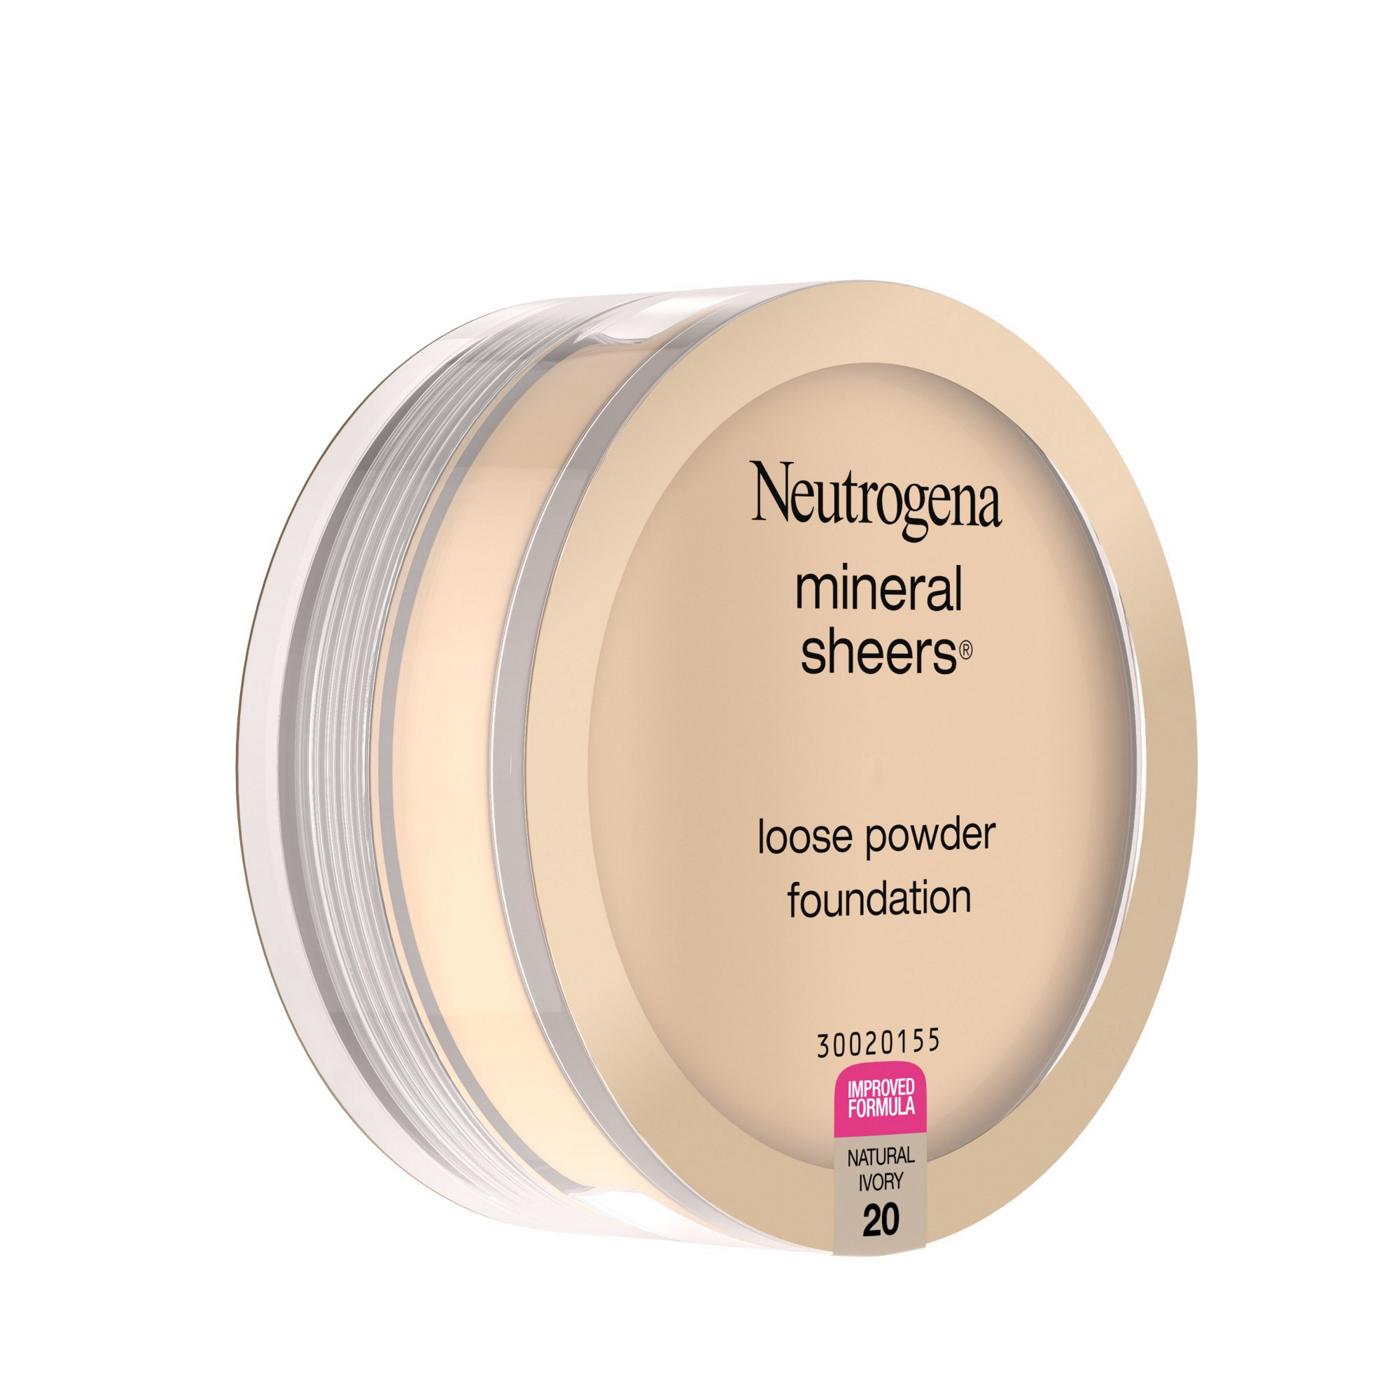 Neutrogena Mineral Sheers Loose Powder Foundation 20 Natural Ivory; image 2 of 6